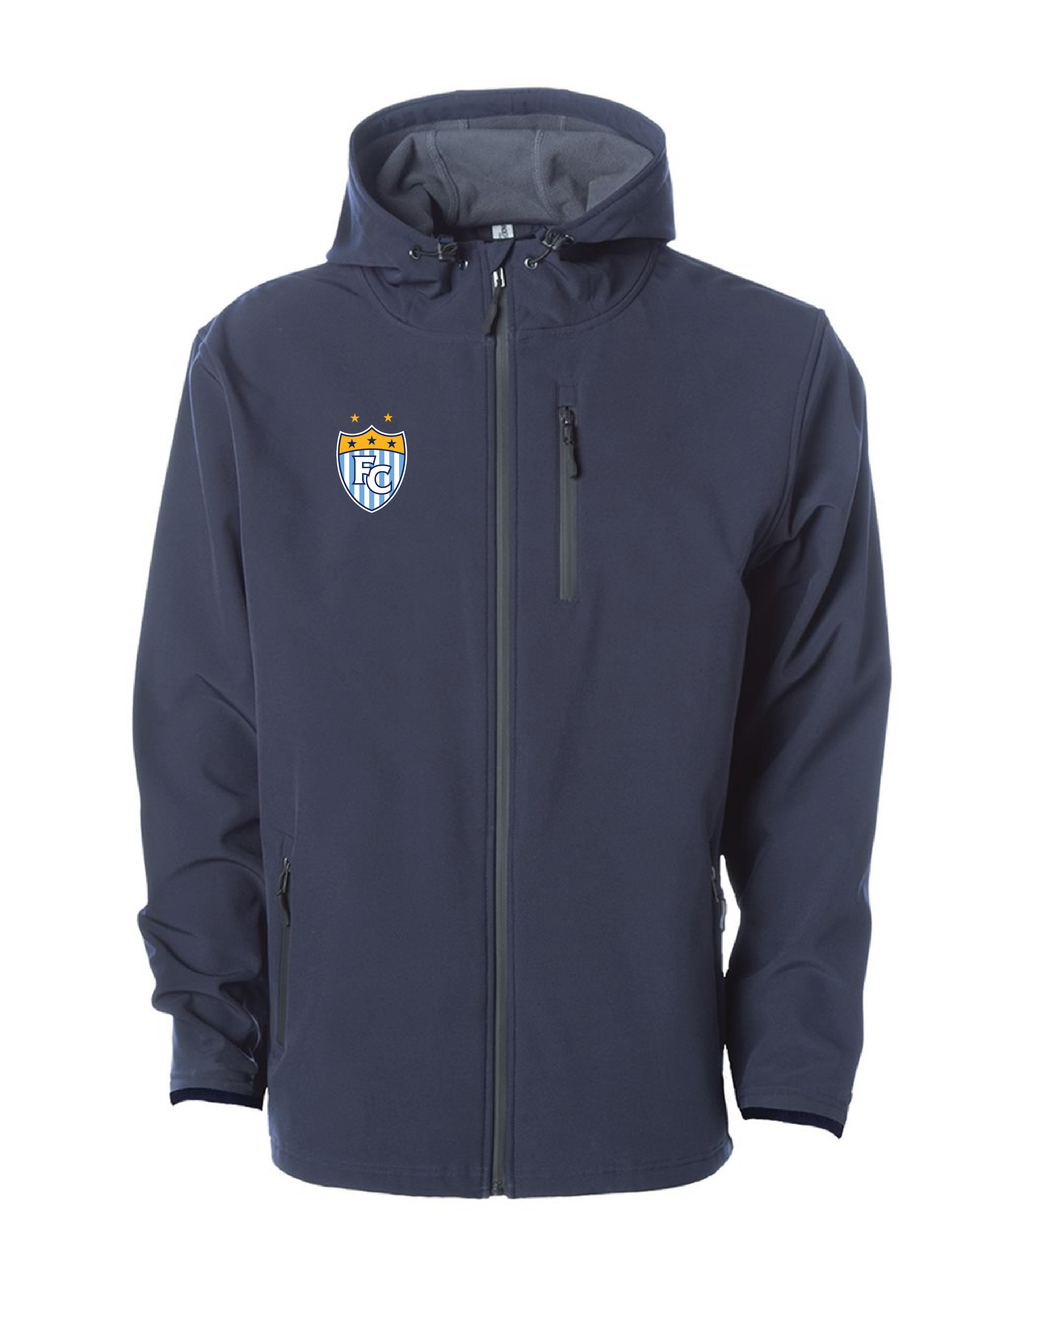 Poly-tech Soft Shell Jacket / Navy / First Colonial Soccer